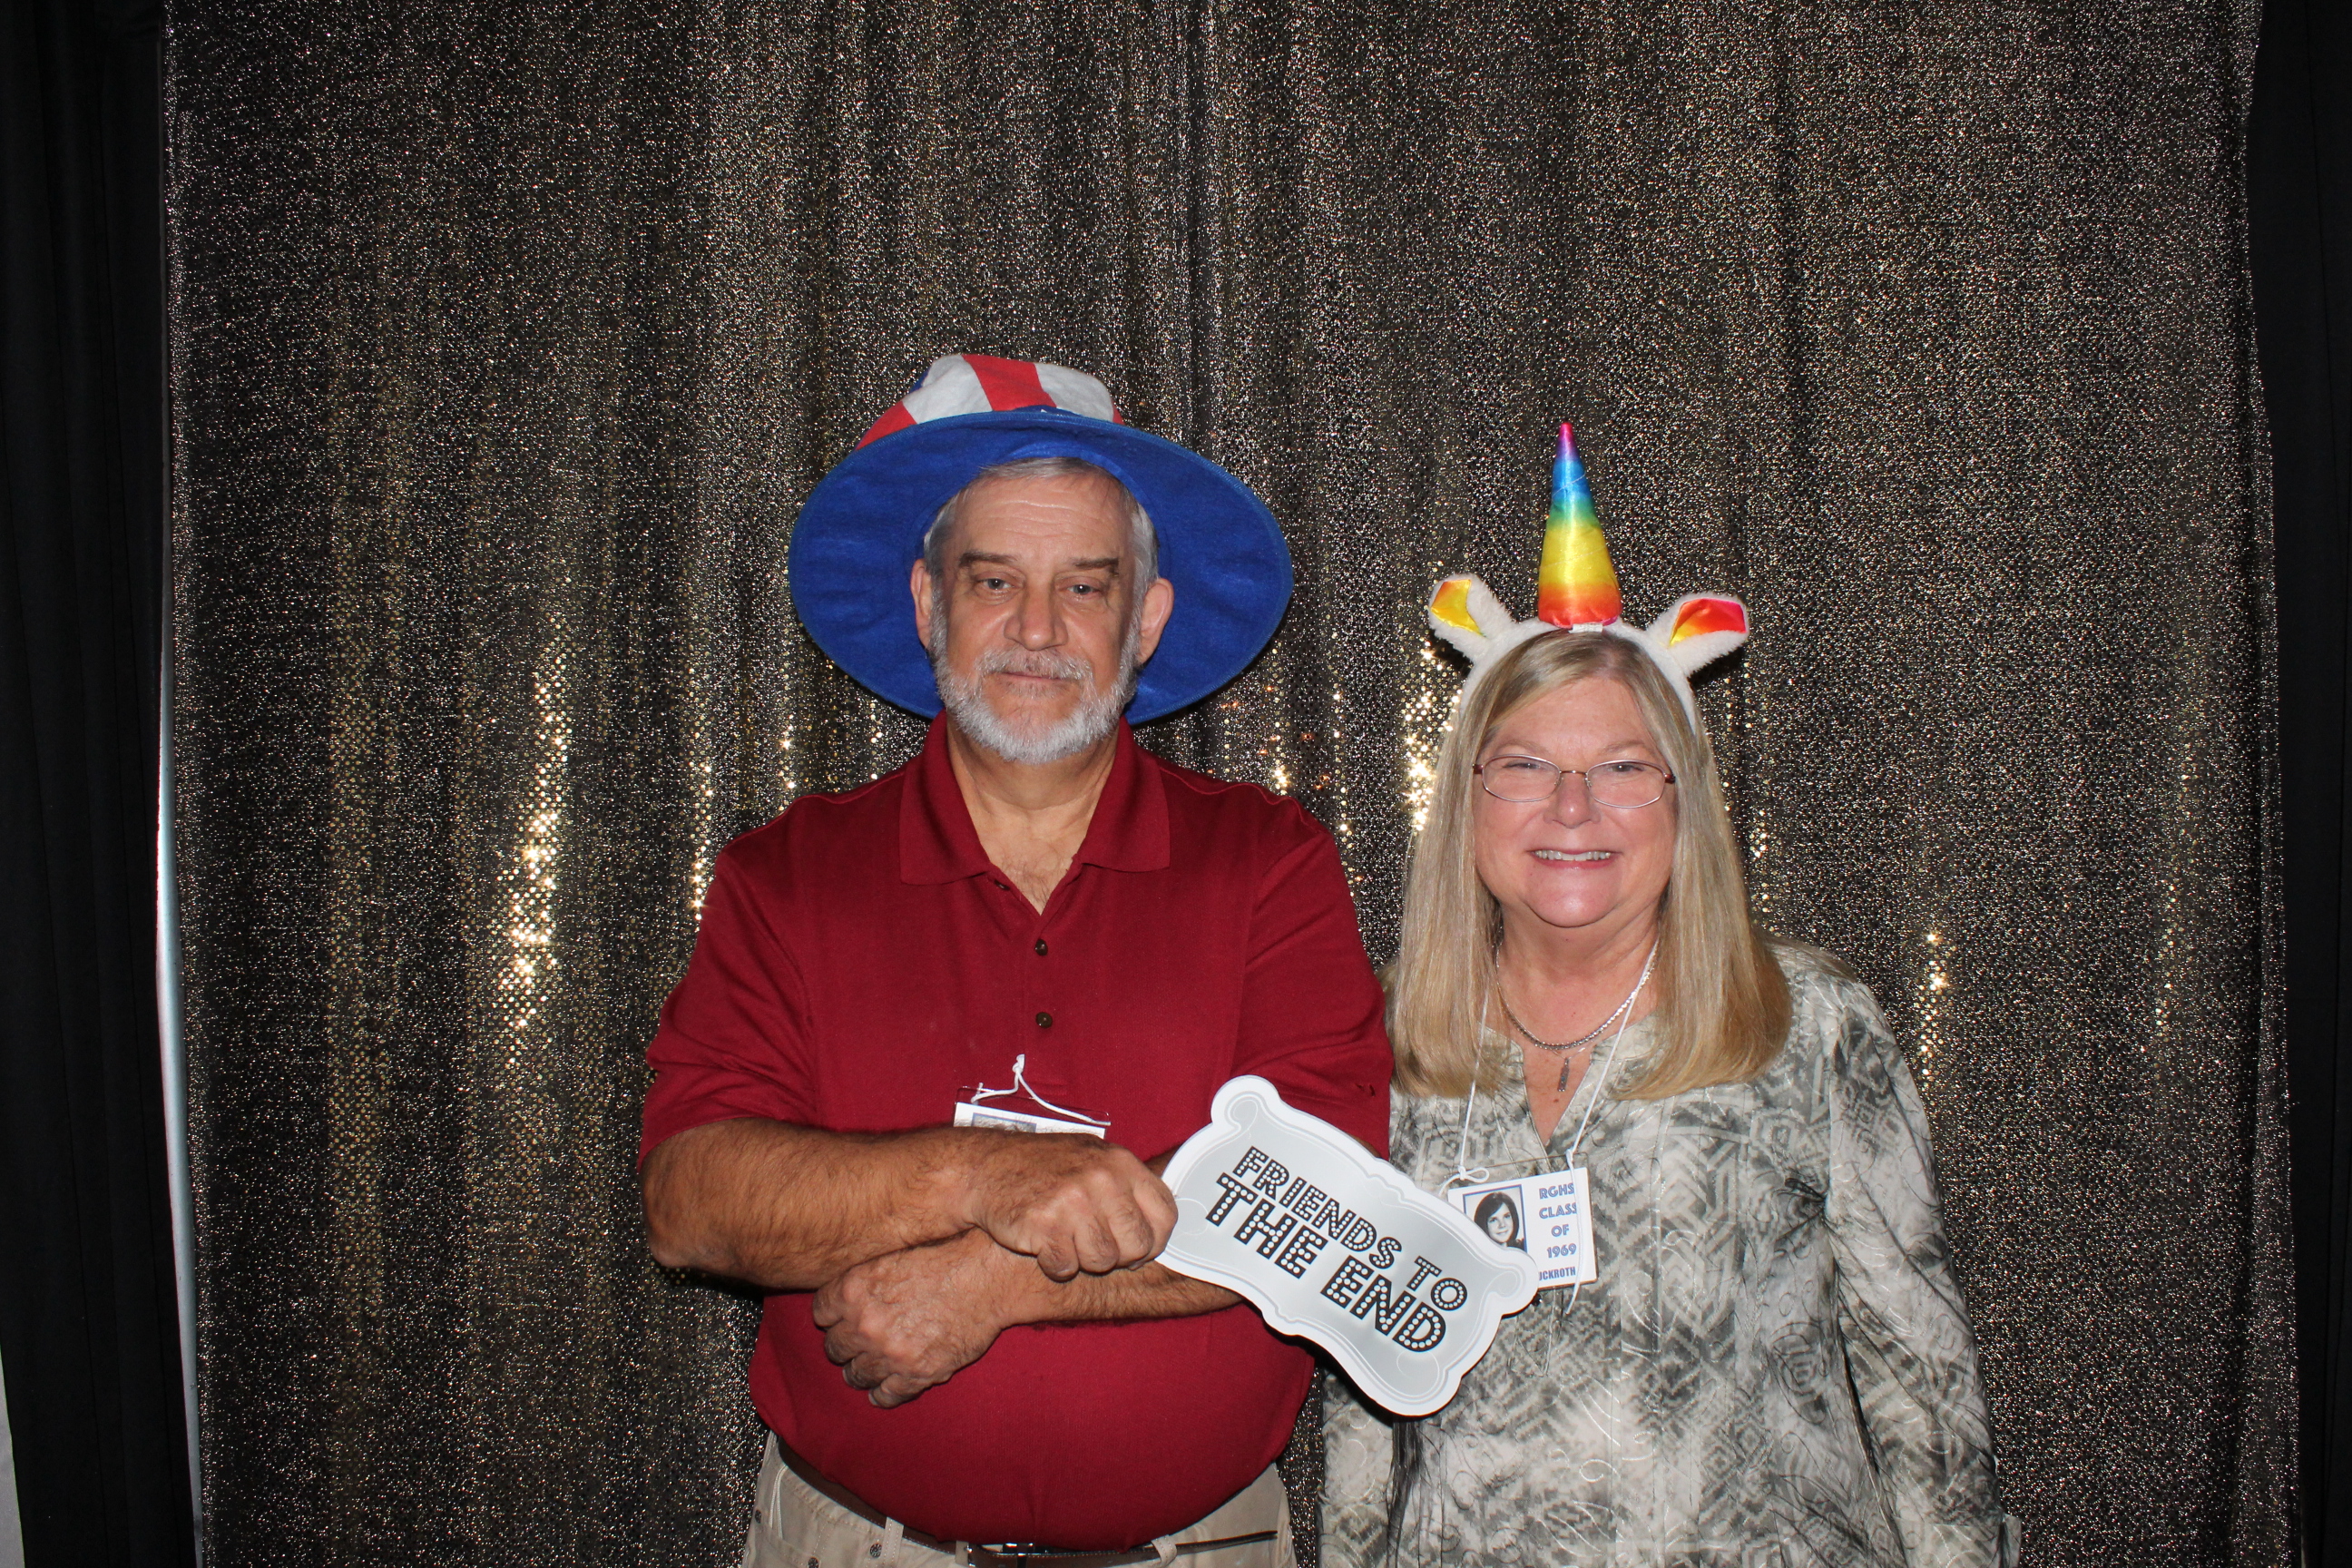 PHOTO BOOTH: John Beaury and Sandy Heise